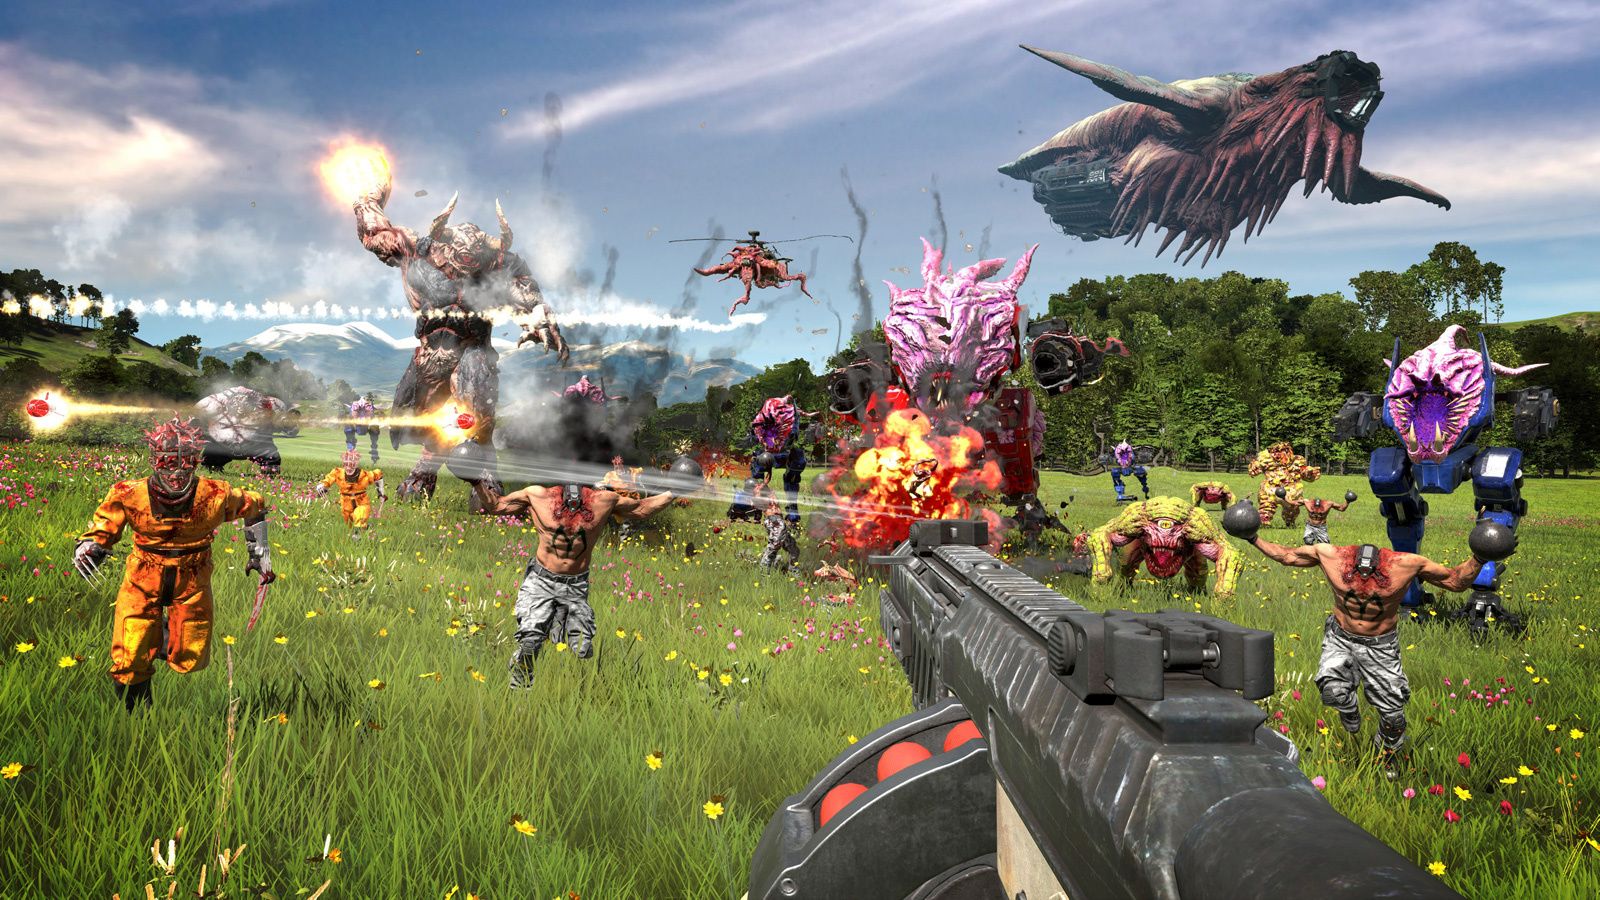 Serious Sam 4' arrives on PC and Stadia in August